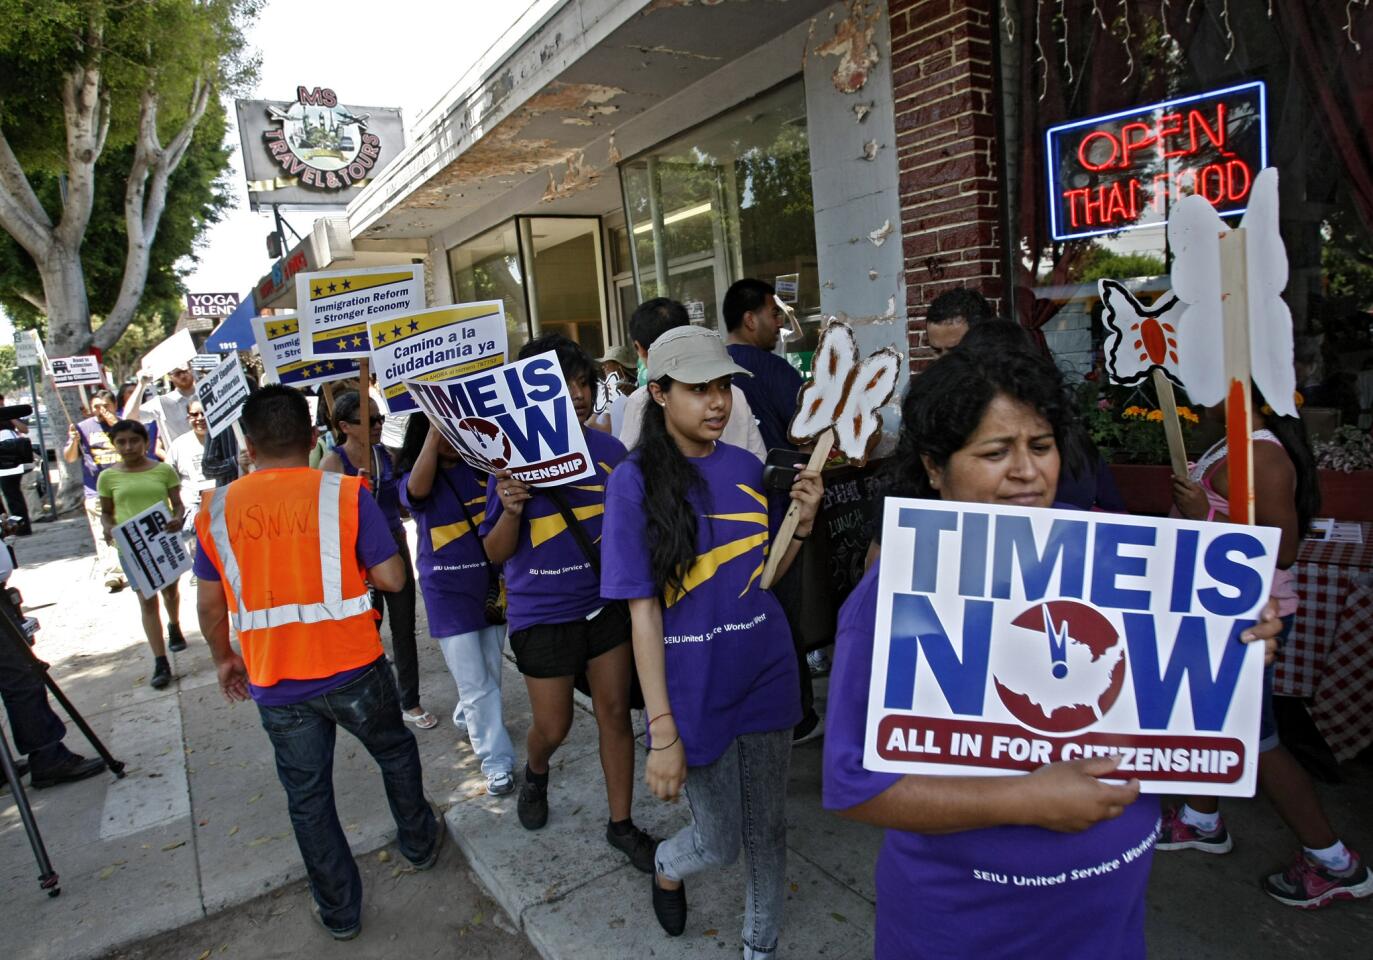 Photo Gallery: Immigration reform rally at Burbank's Republican Party offices